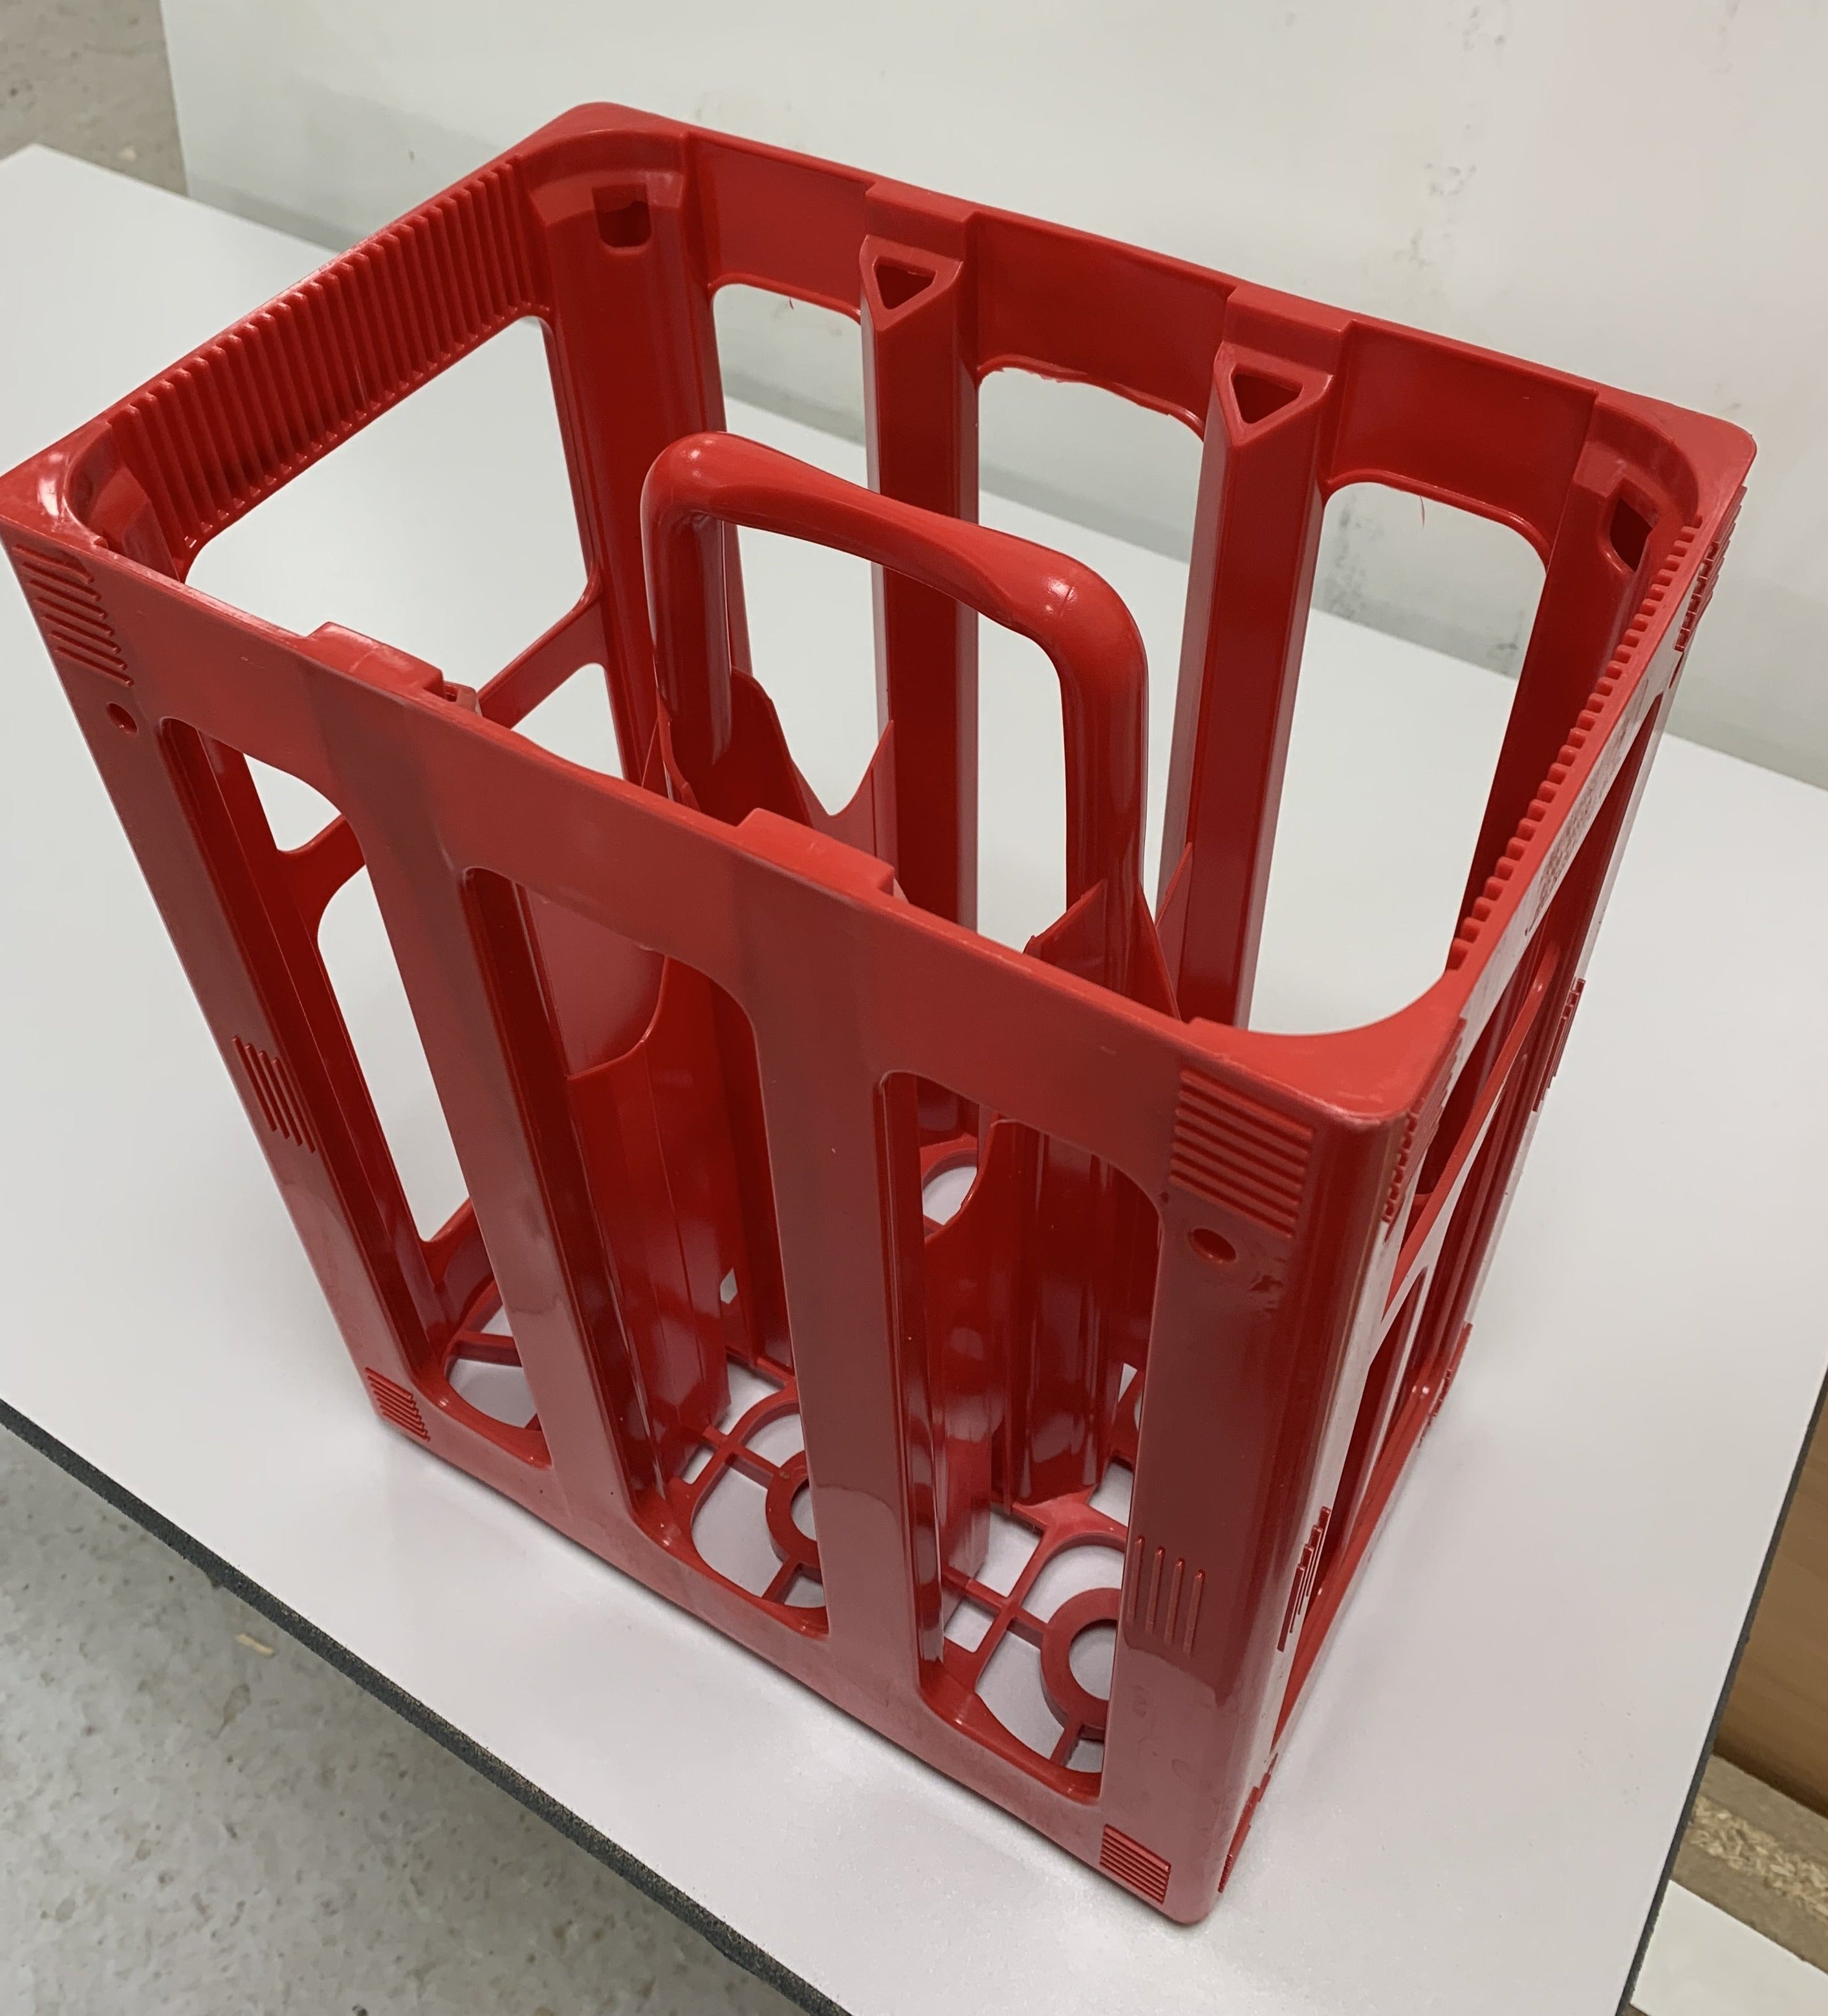 Red 6 bottle carrier from Fuzzy Brands